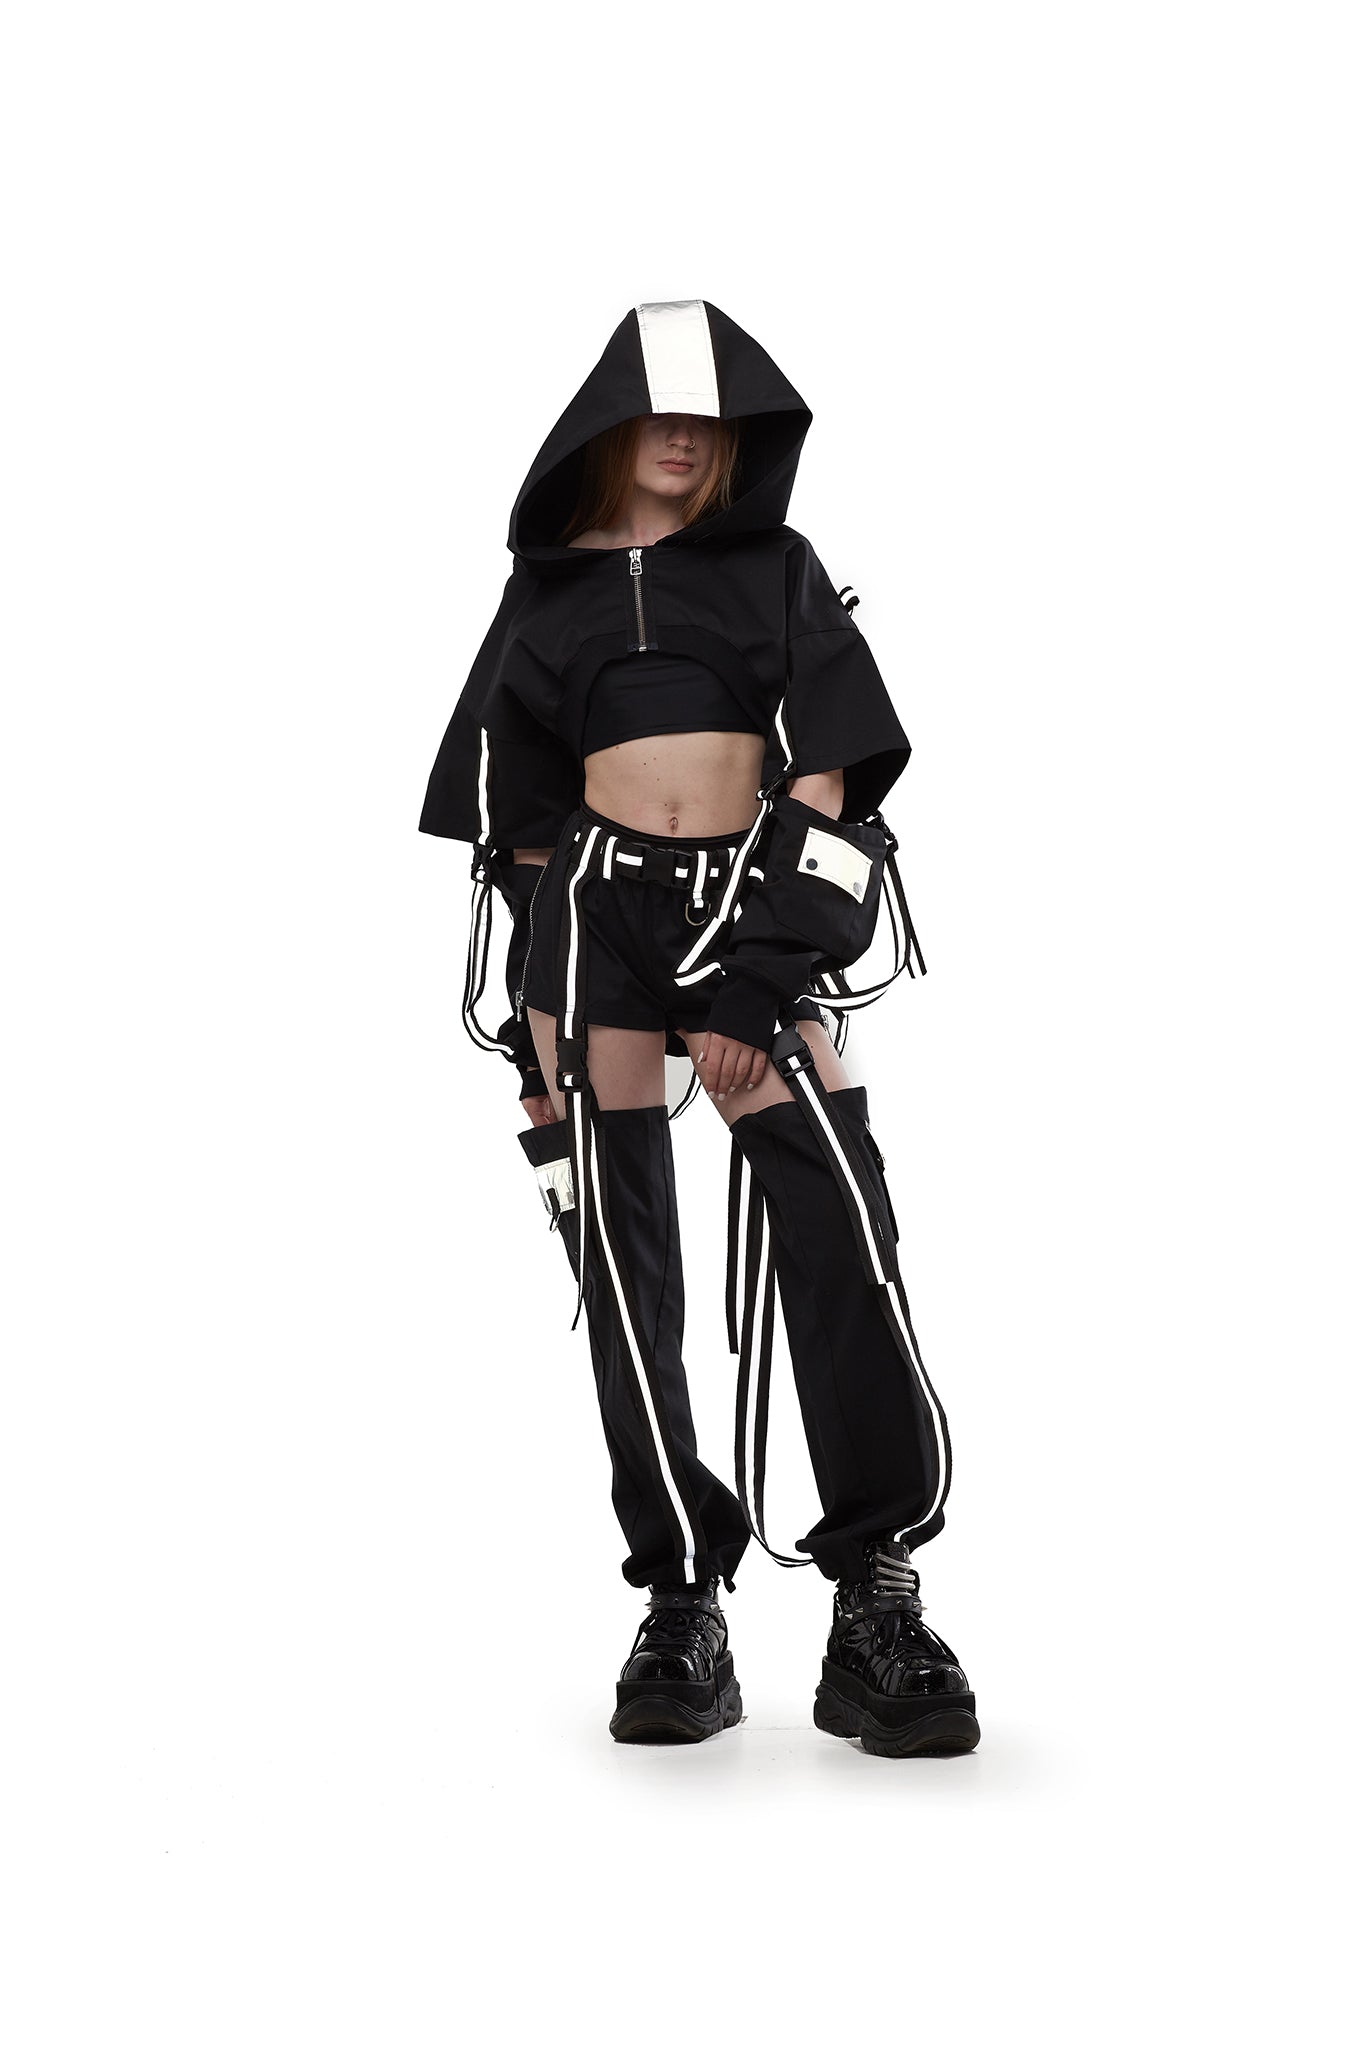 Hooded shrug in Black with reflective straps.